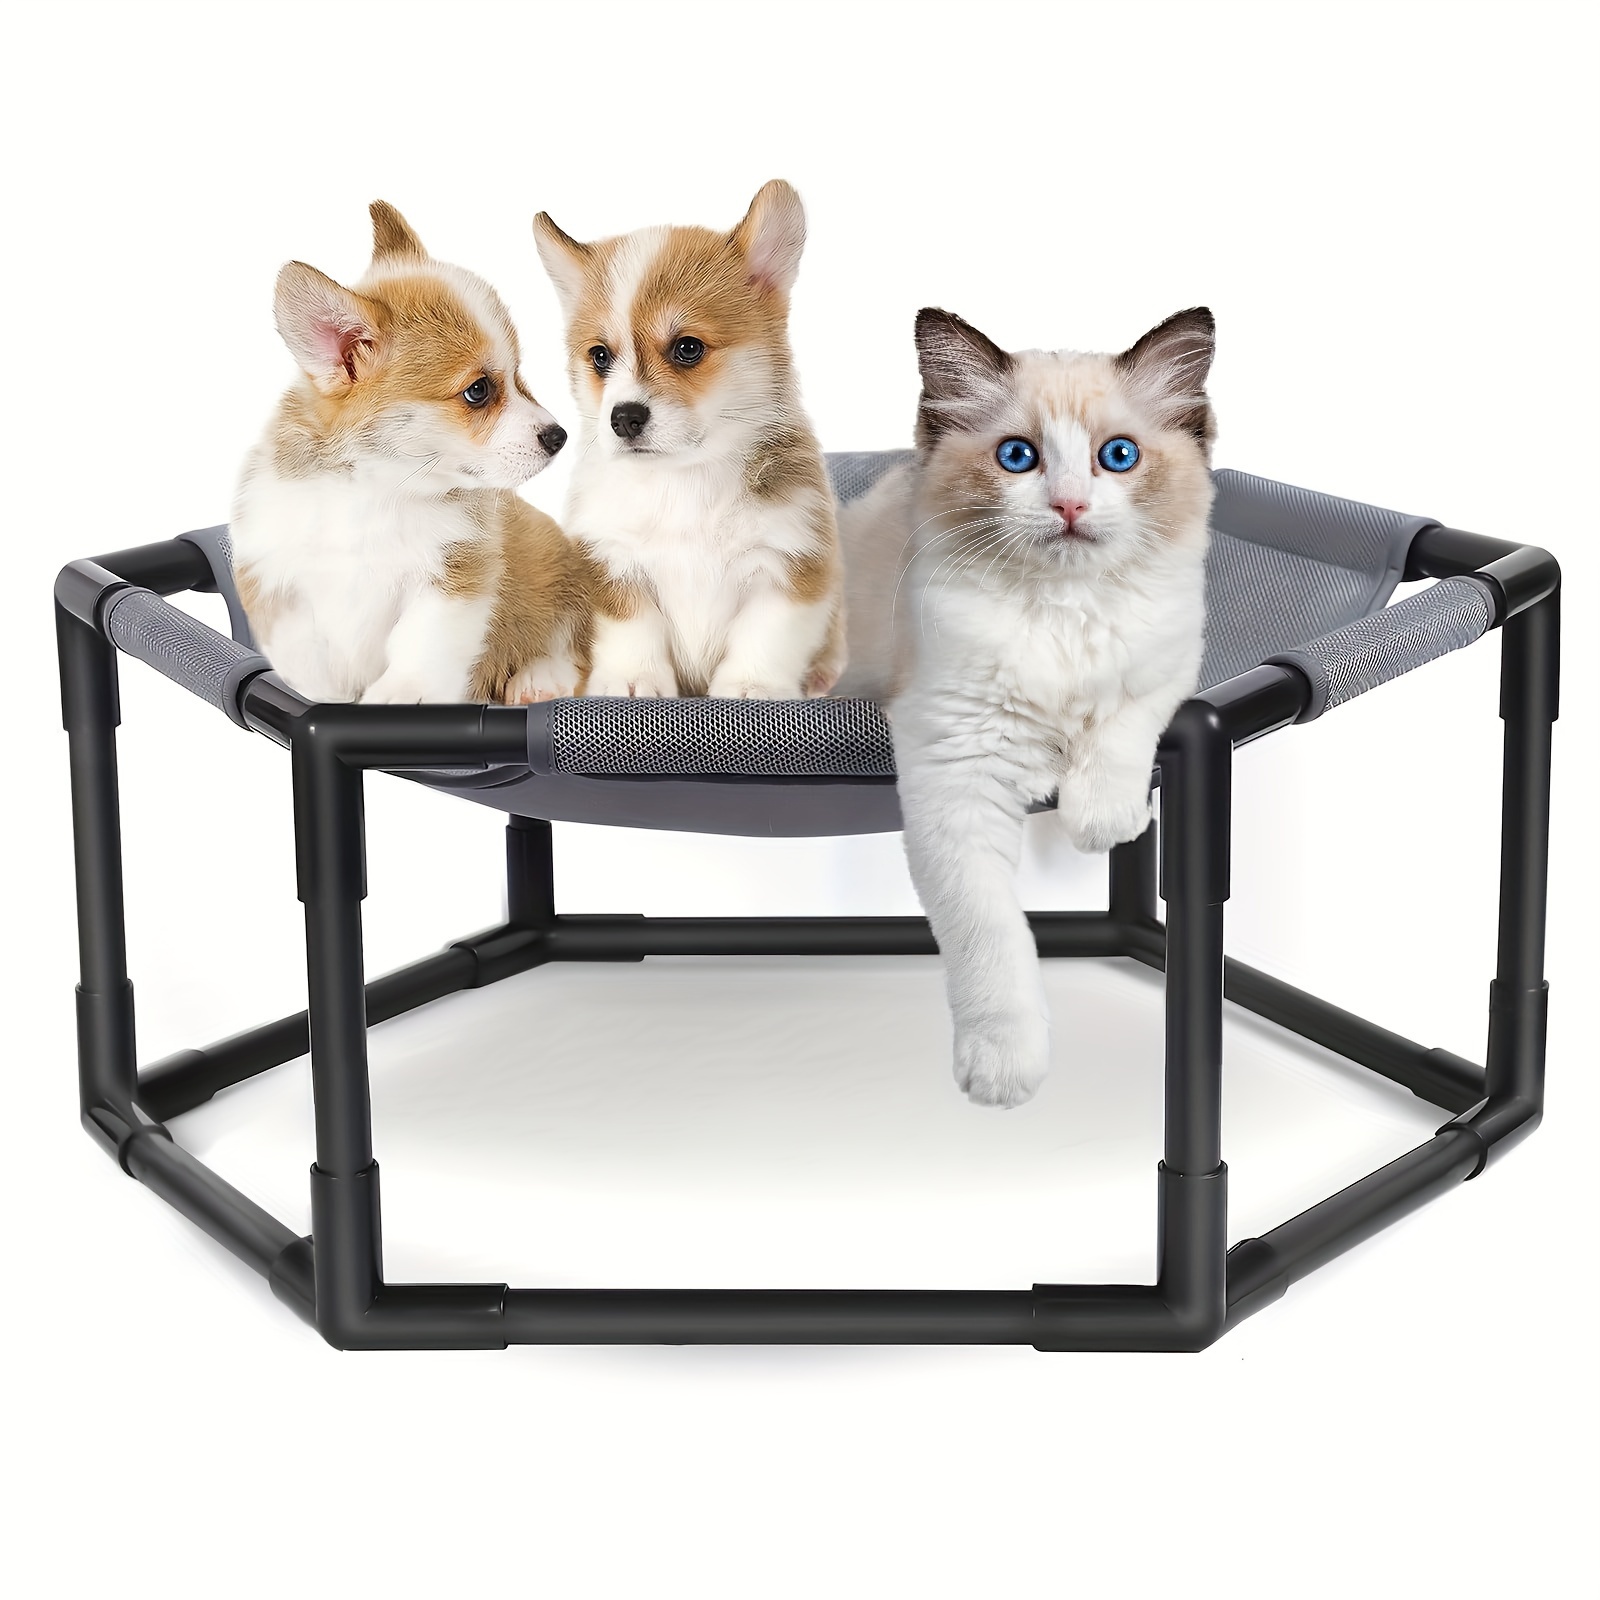 

Elevated Dog Bed For Small Dogs With Washable Breathable Mesh And Removable Pvc Frame Raised Cooling Pet Cot Grey